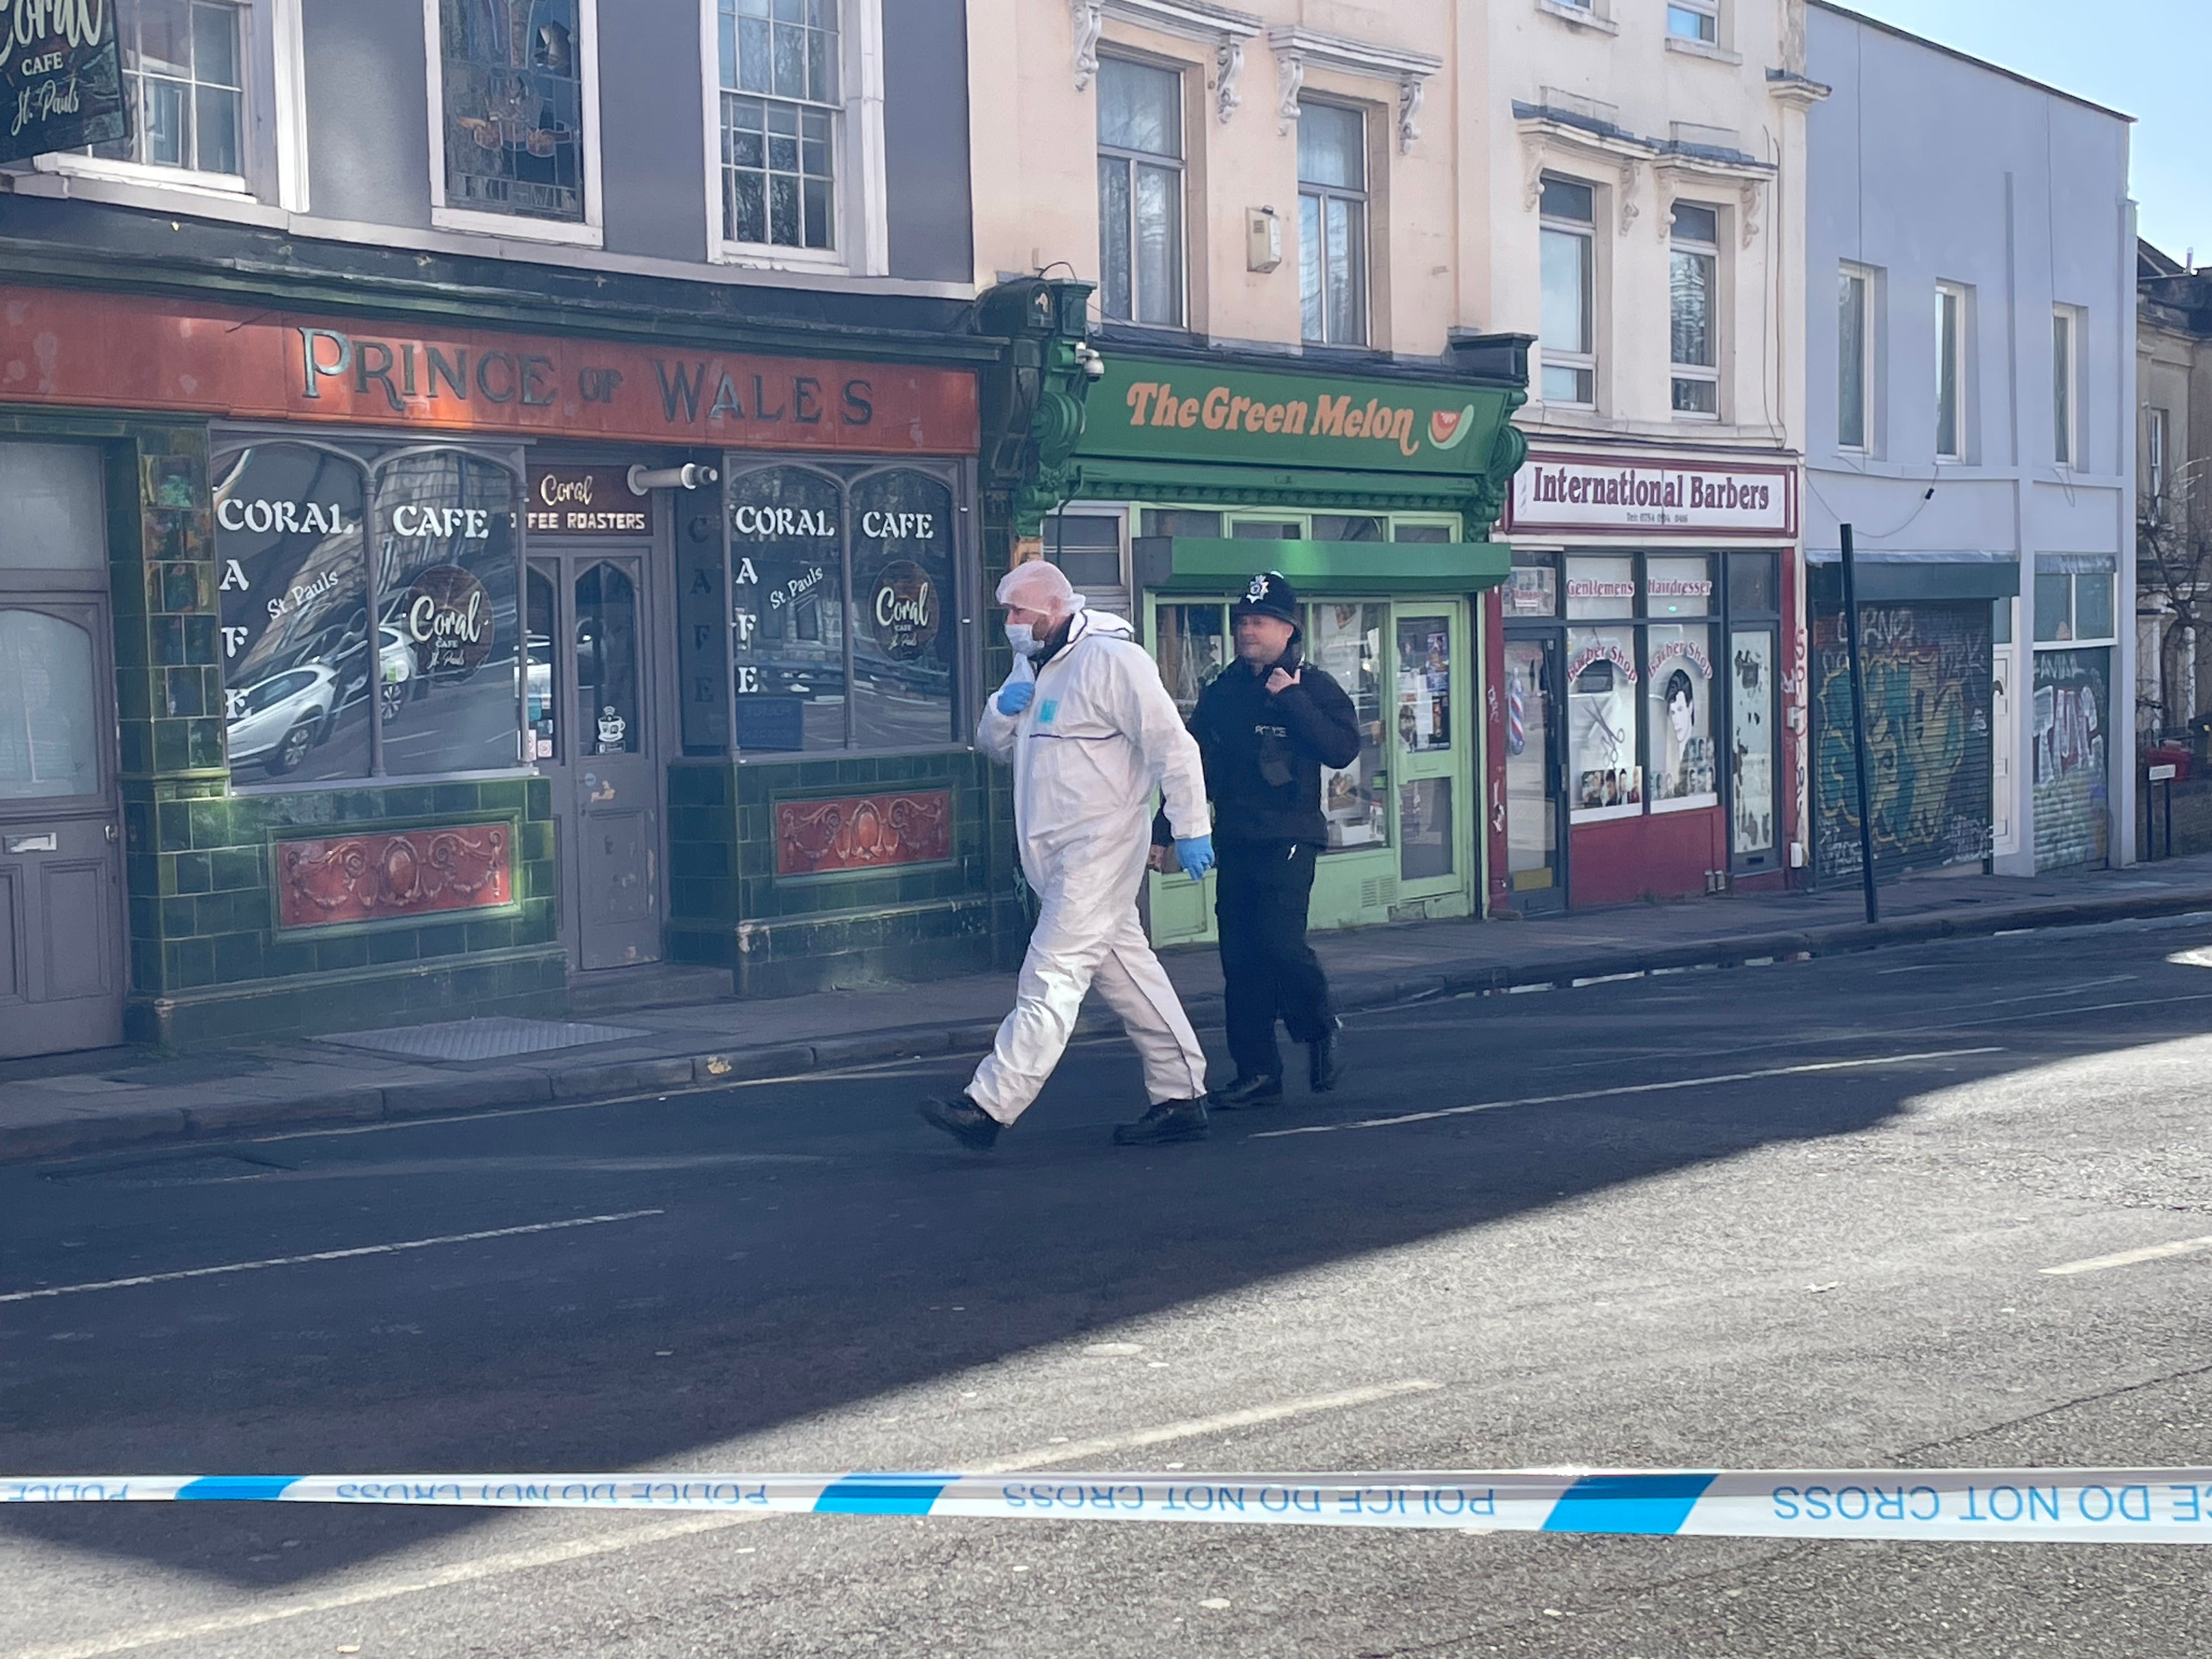 Police at the scene of a "serious incident" which happened overnight on Ashley Road in the St Paul's area of Bristol